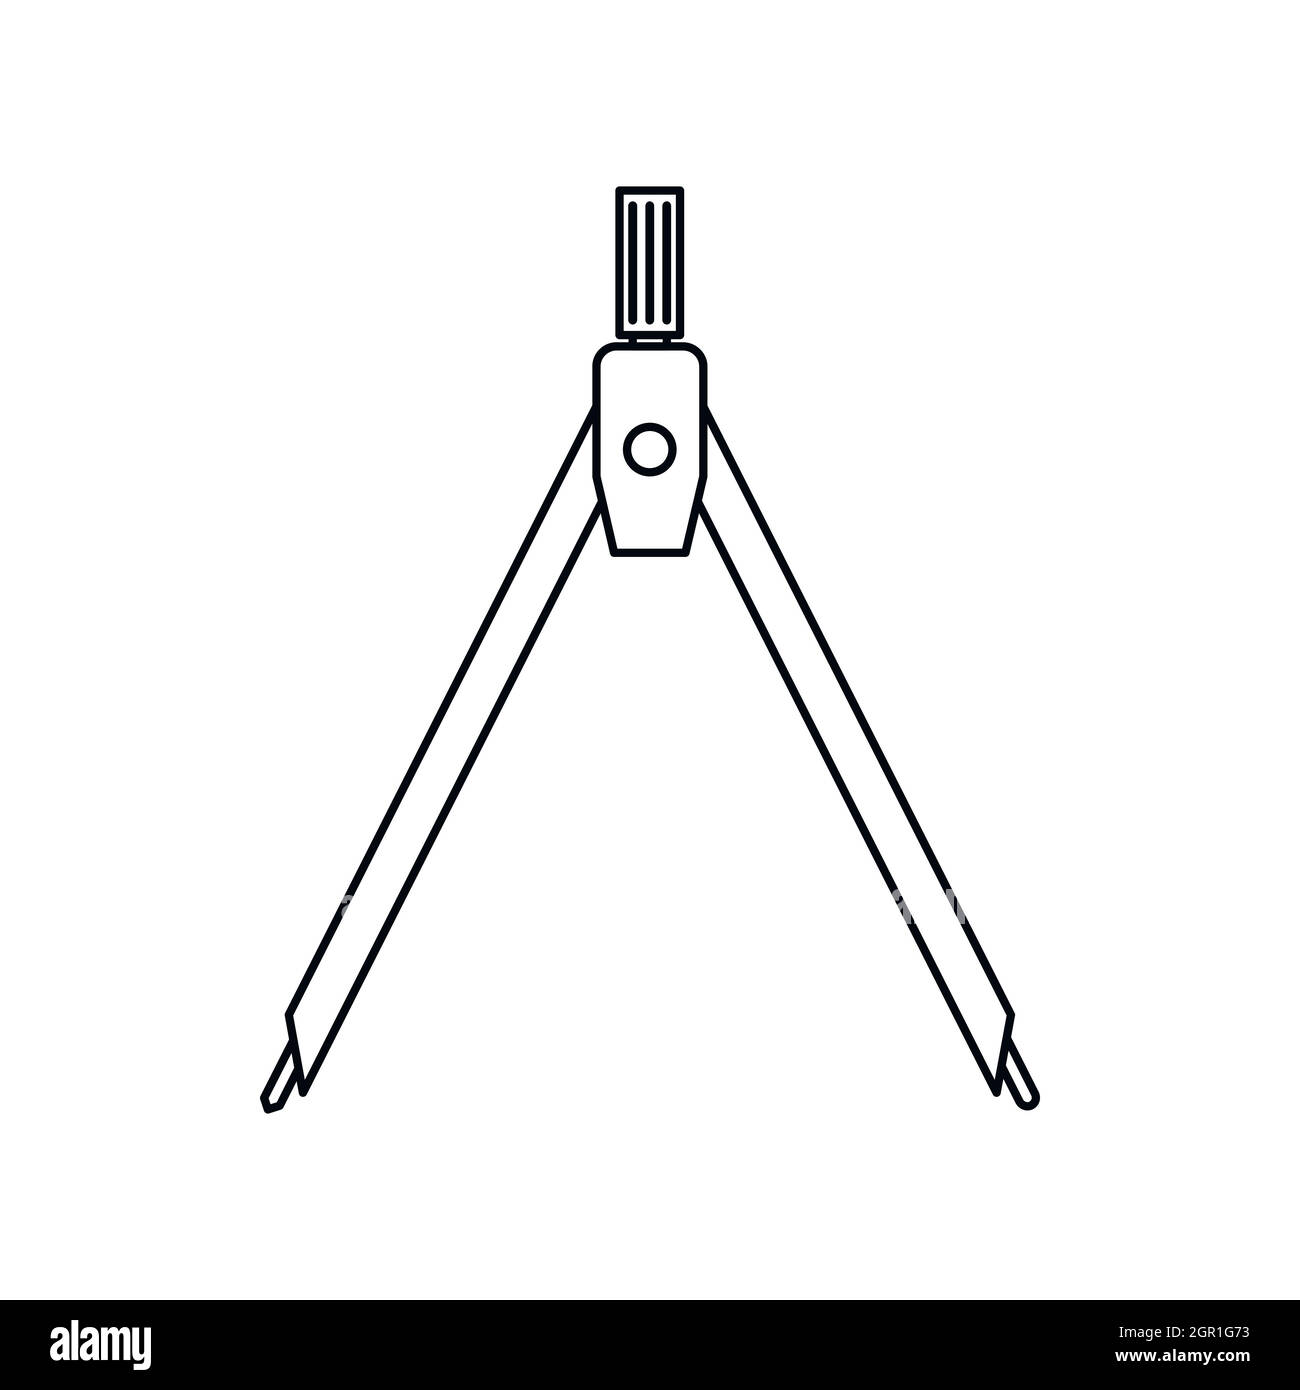 File:Compass (drawing tool).jpg - Wikimedia Commons